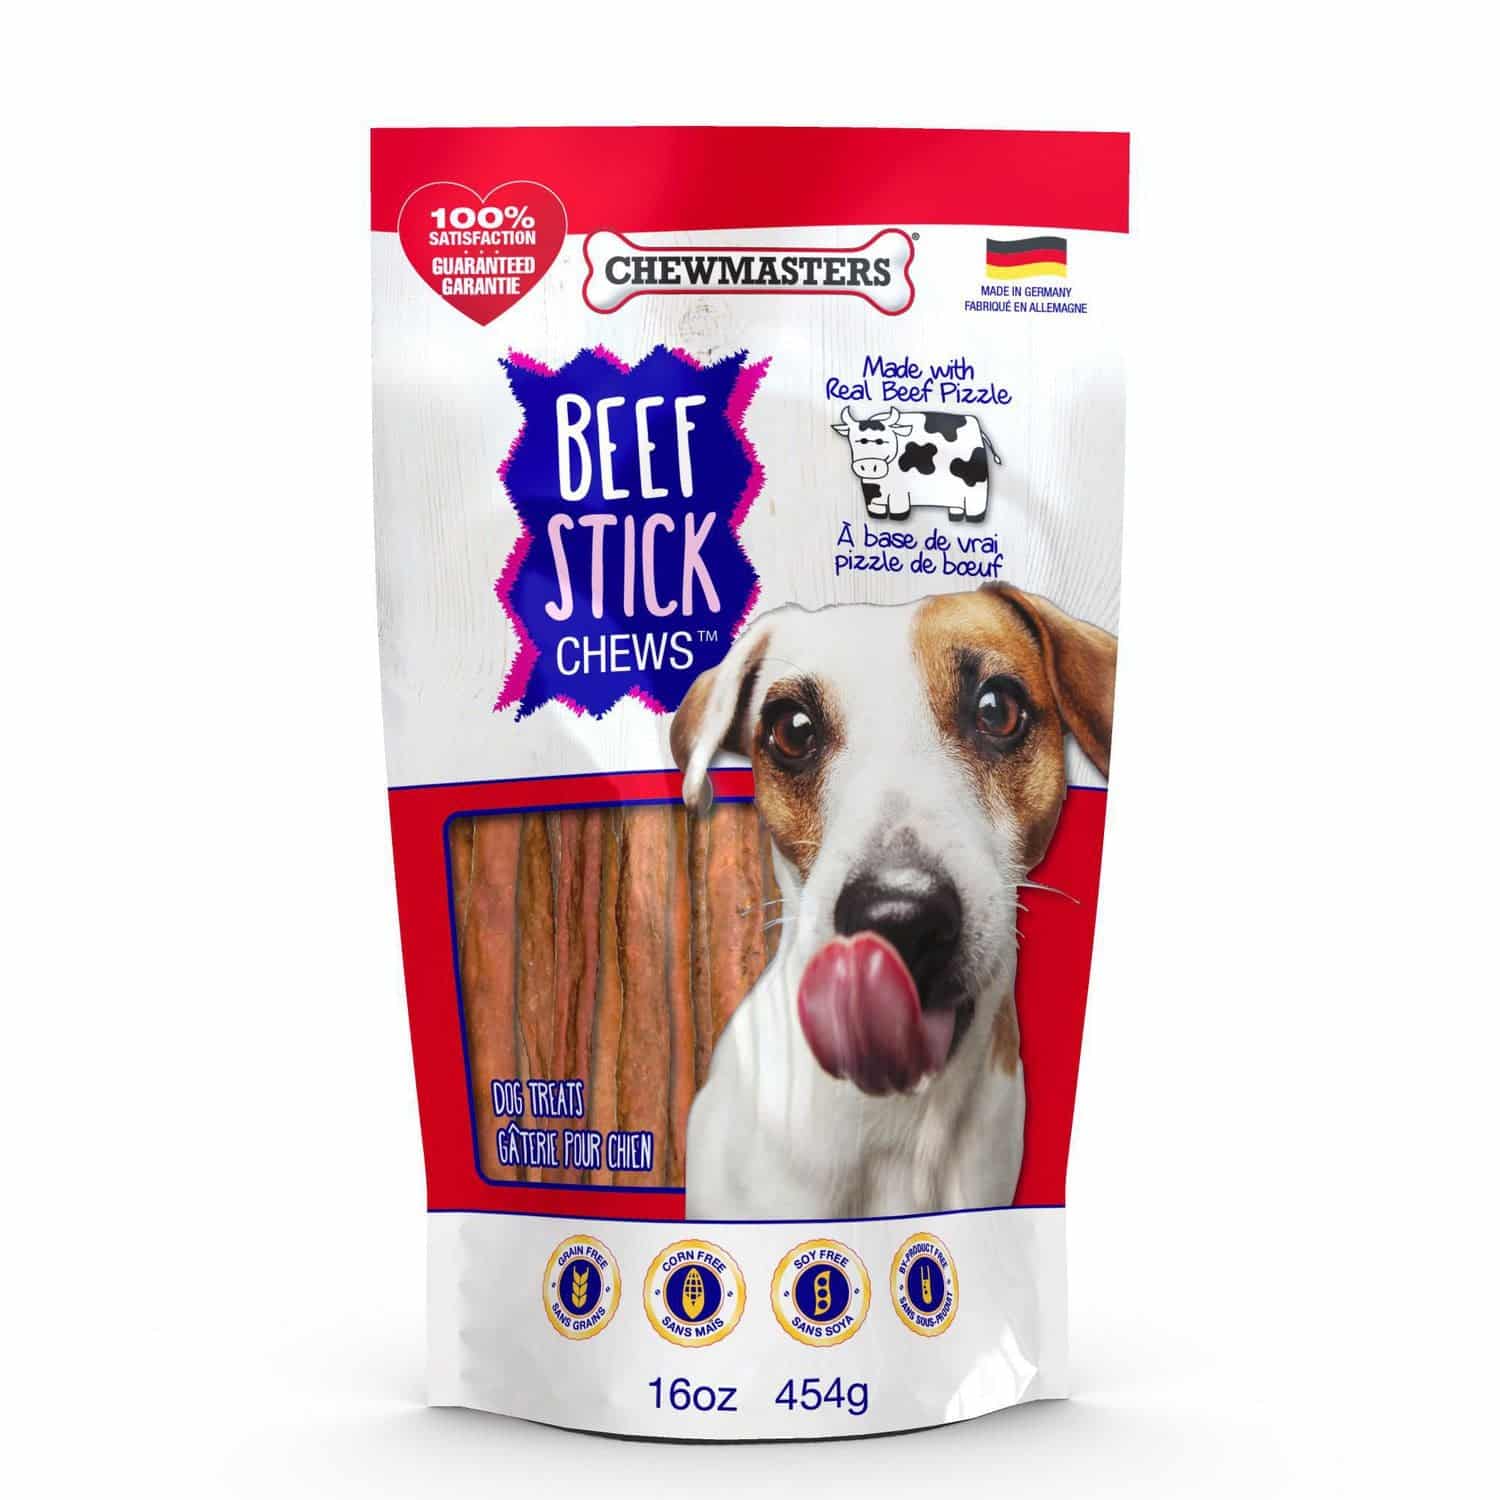 ChewMasters - Beef Stick Chews - Bag